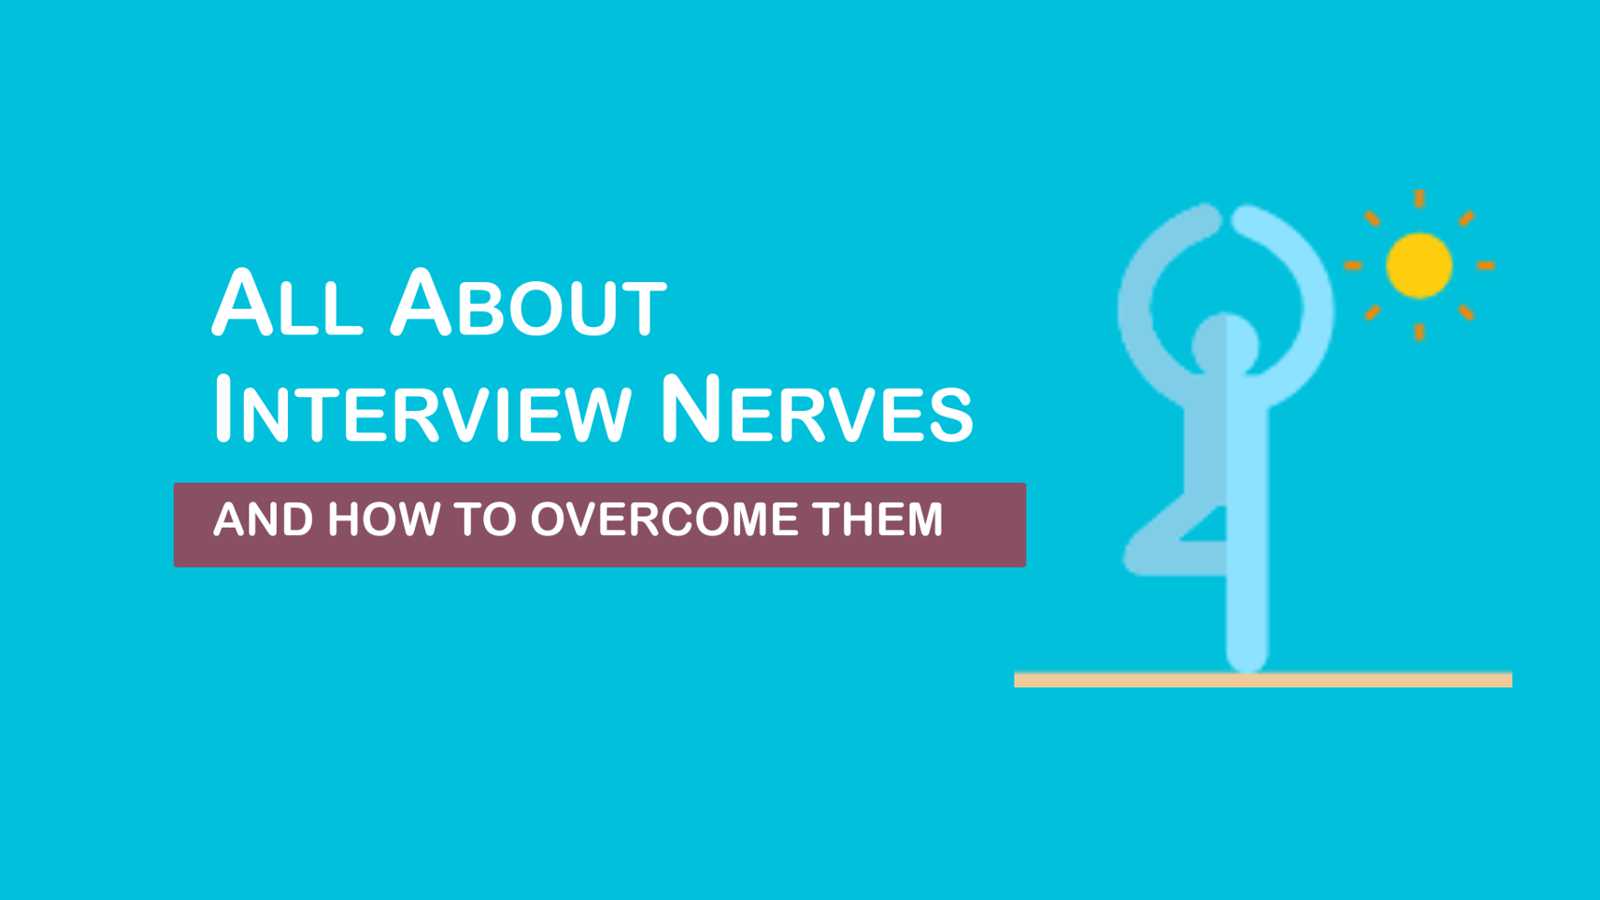 How to overcome interview nerves